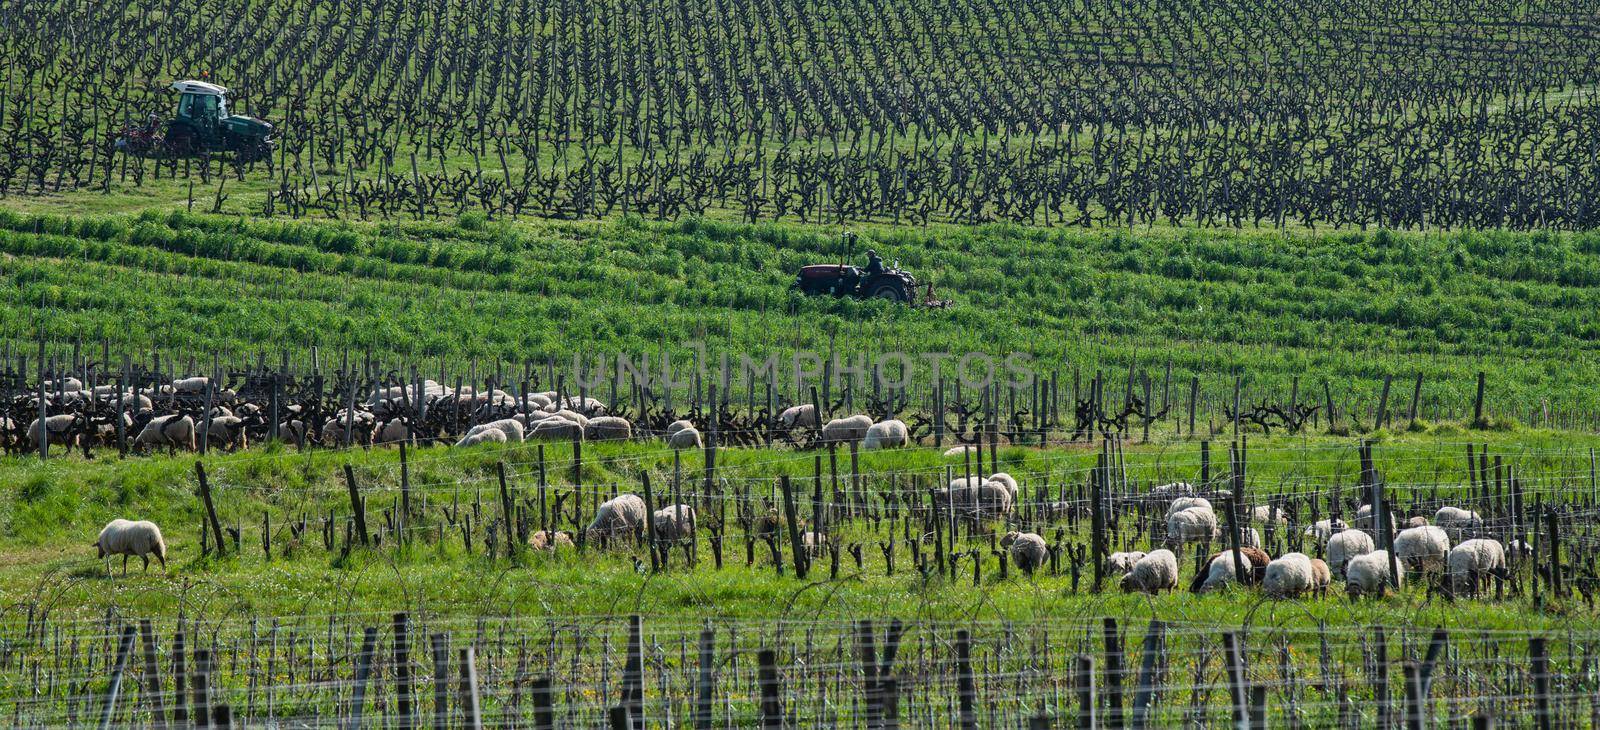 Domestic sheeps grazing with tractors working behind in the Bordeaux vineyards by FreeProd